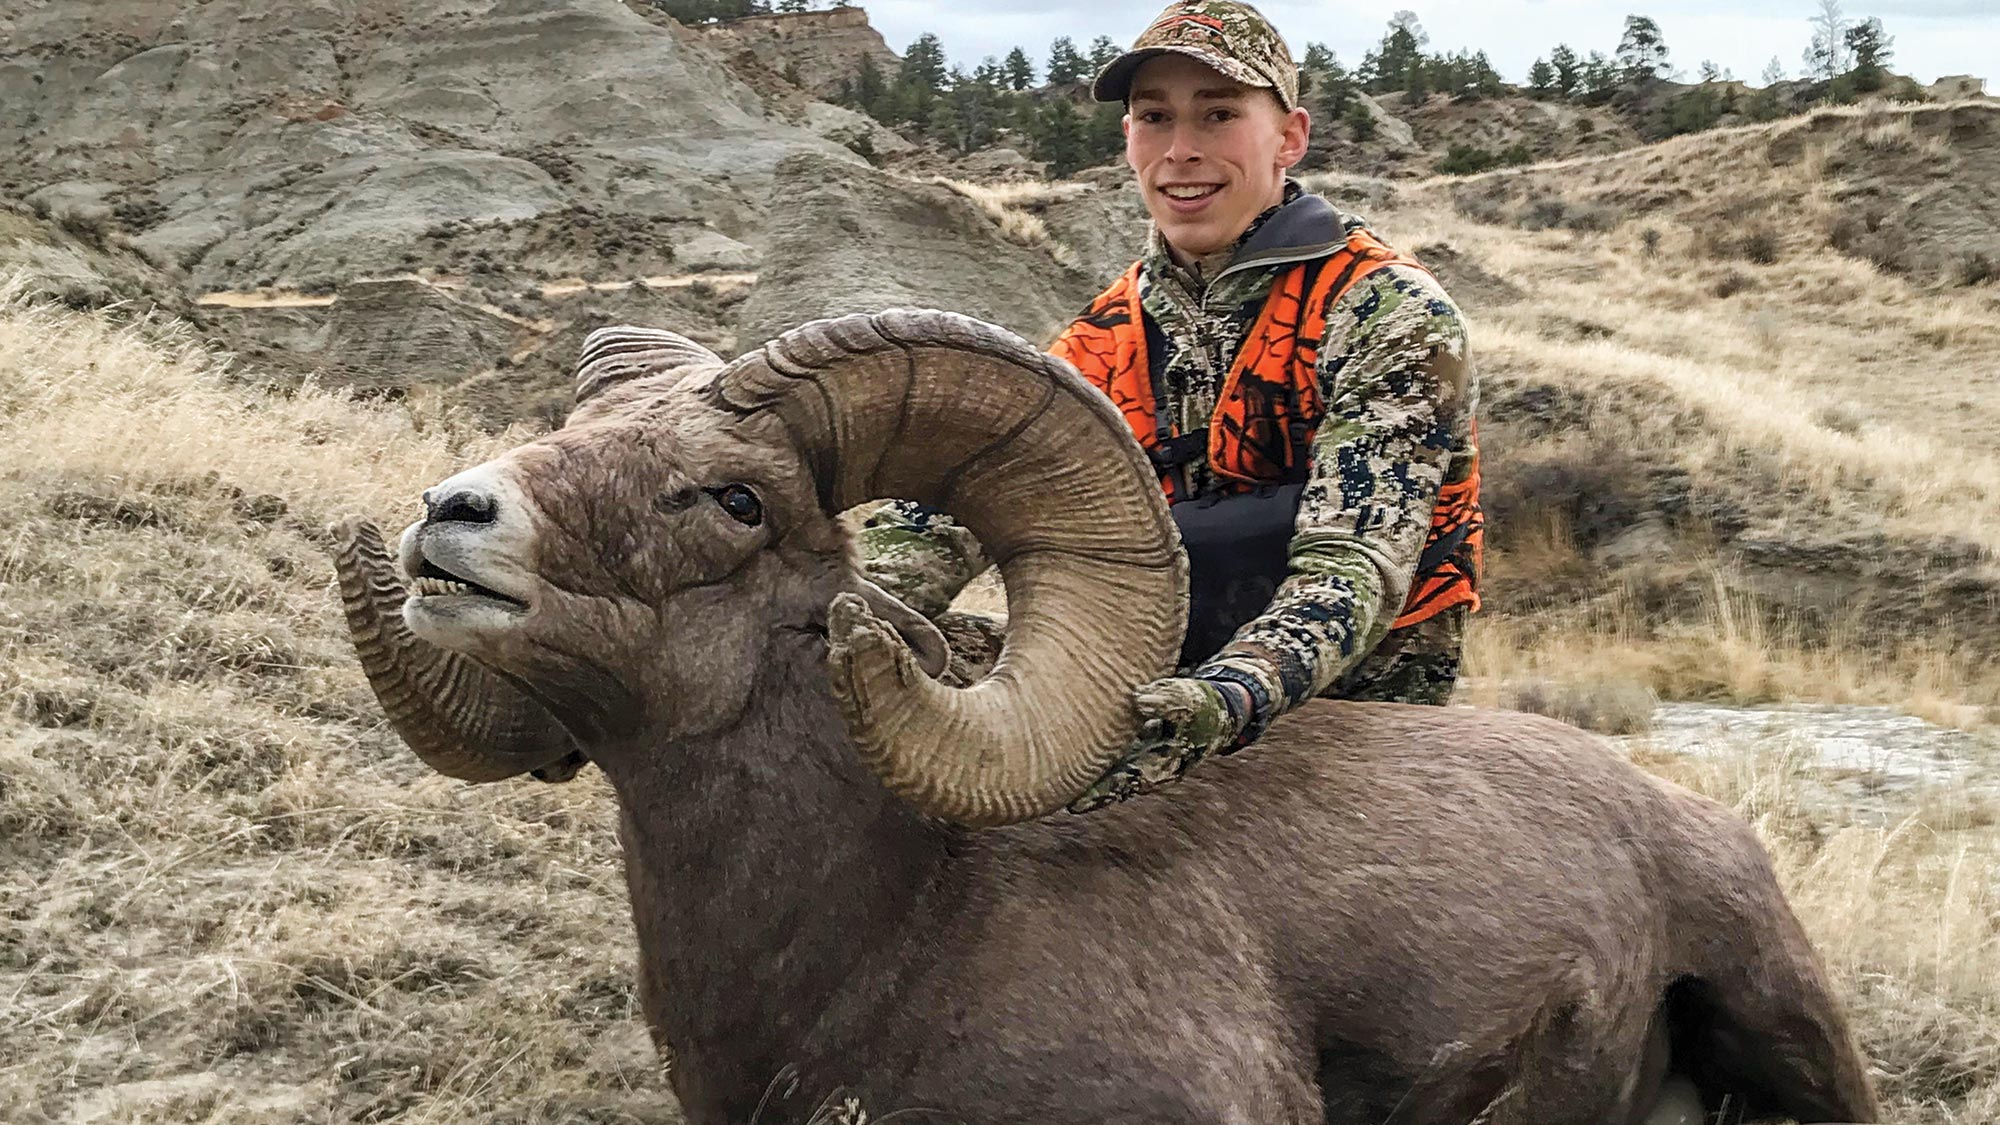 hunter poses with record-book bighorn ram in rocky, grassy area